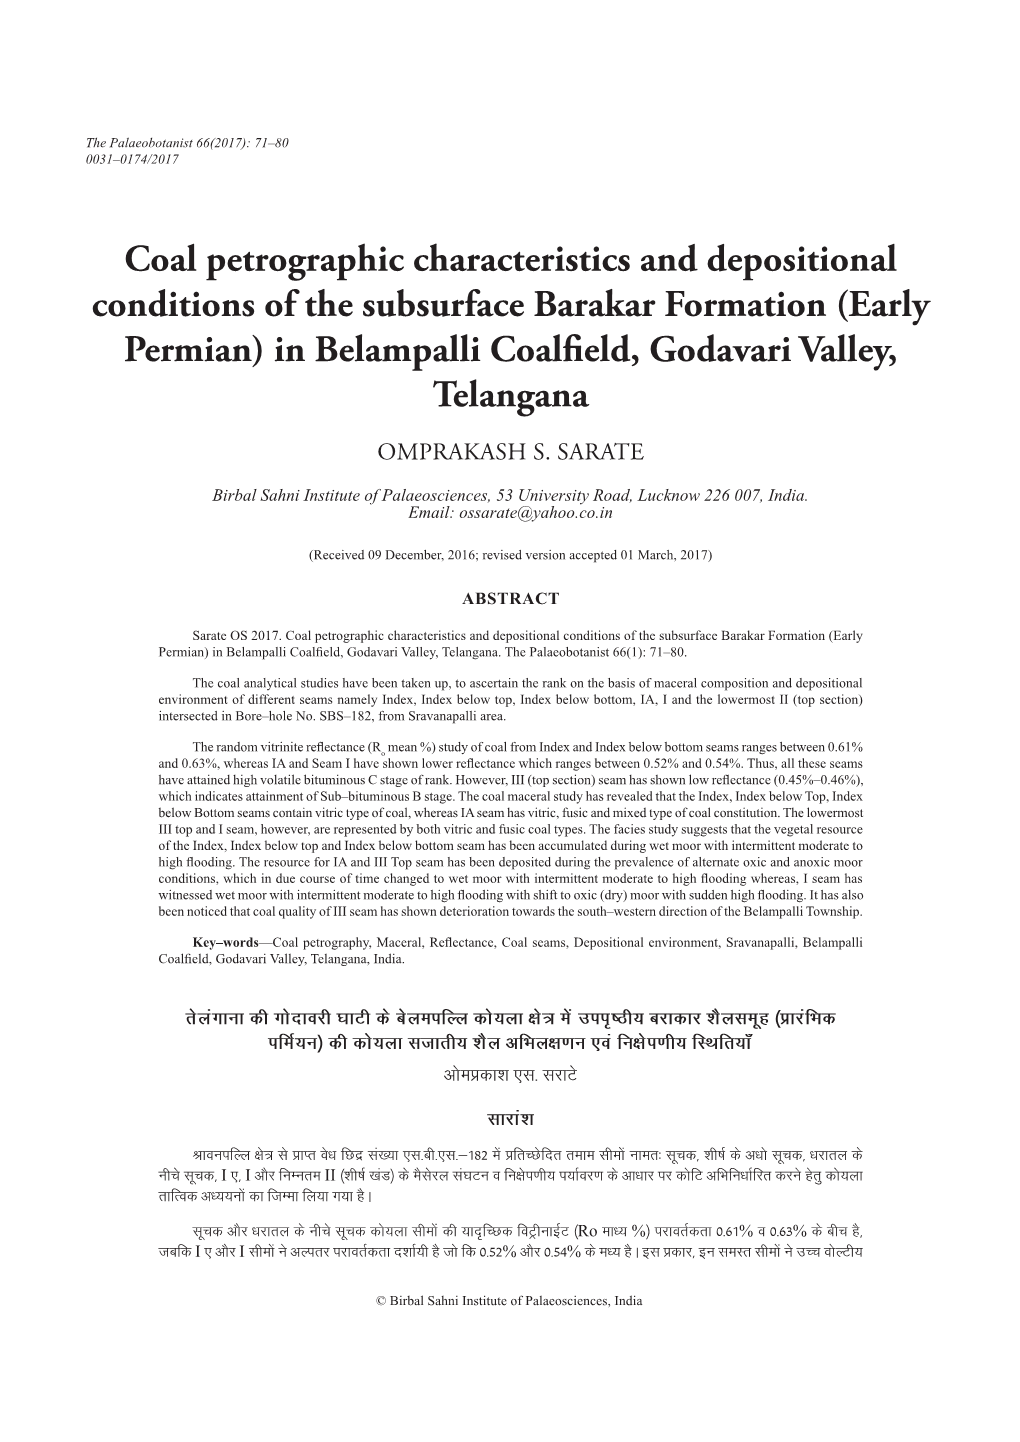 Coal Petrographic Characteristics and Depositional Conditions of the Subsurface Barakar Formation (Early Permian) in Belampalli Coalfield, Godavari Valley, Telangana